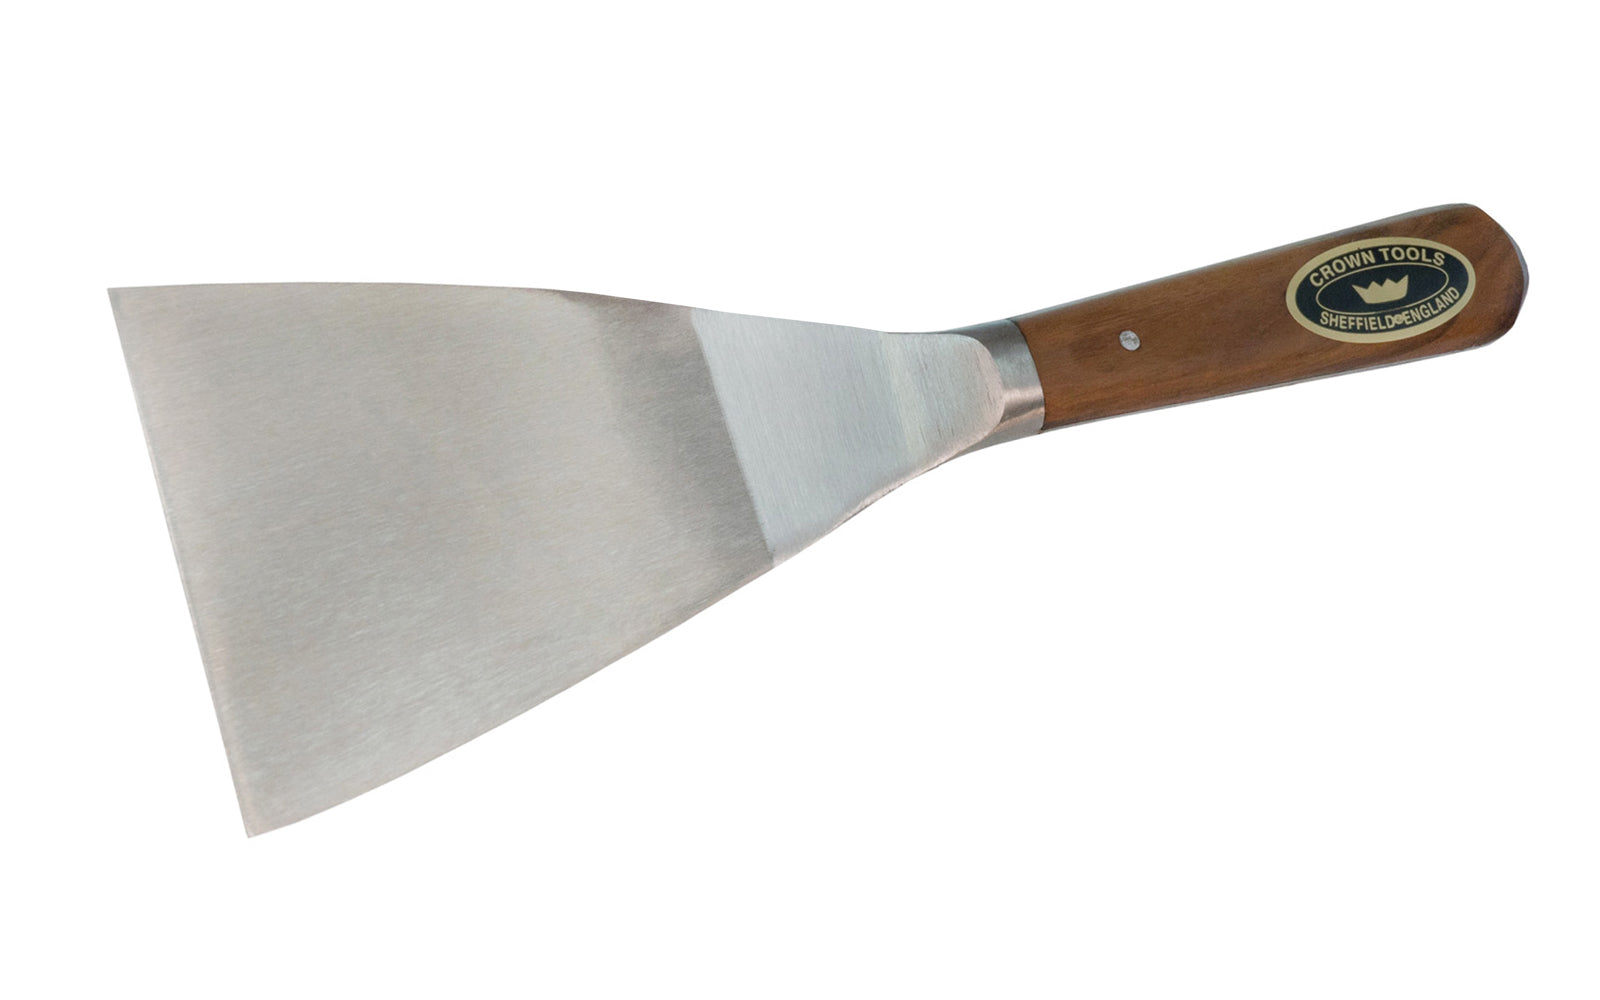 Crown Tools 4" (102 mm) Filing Knife with a flexible spring-tempered blade. High quality putty knife for filing holes, cracks, etc. Walnut wood handle. Made in Sheffield, England.